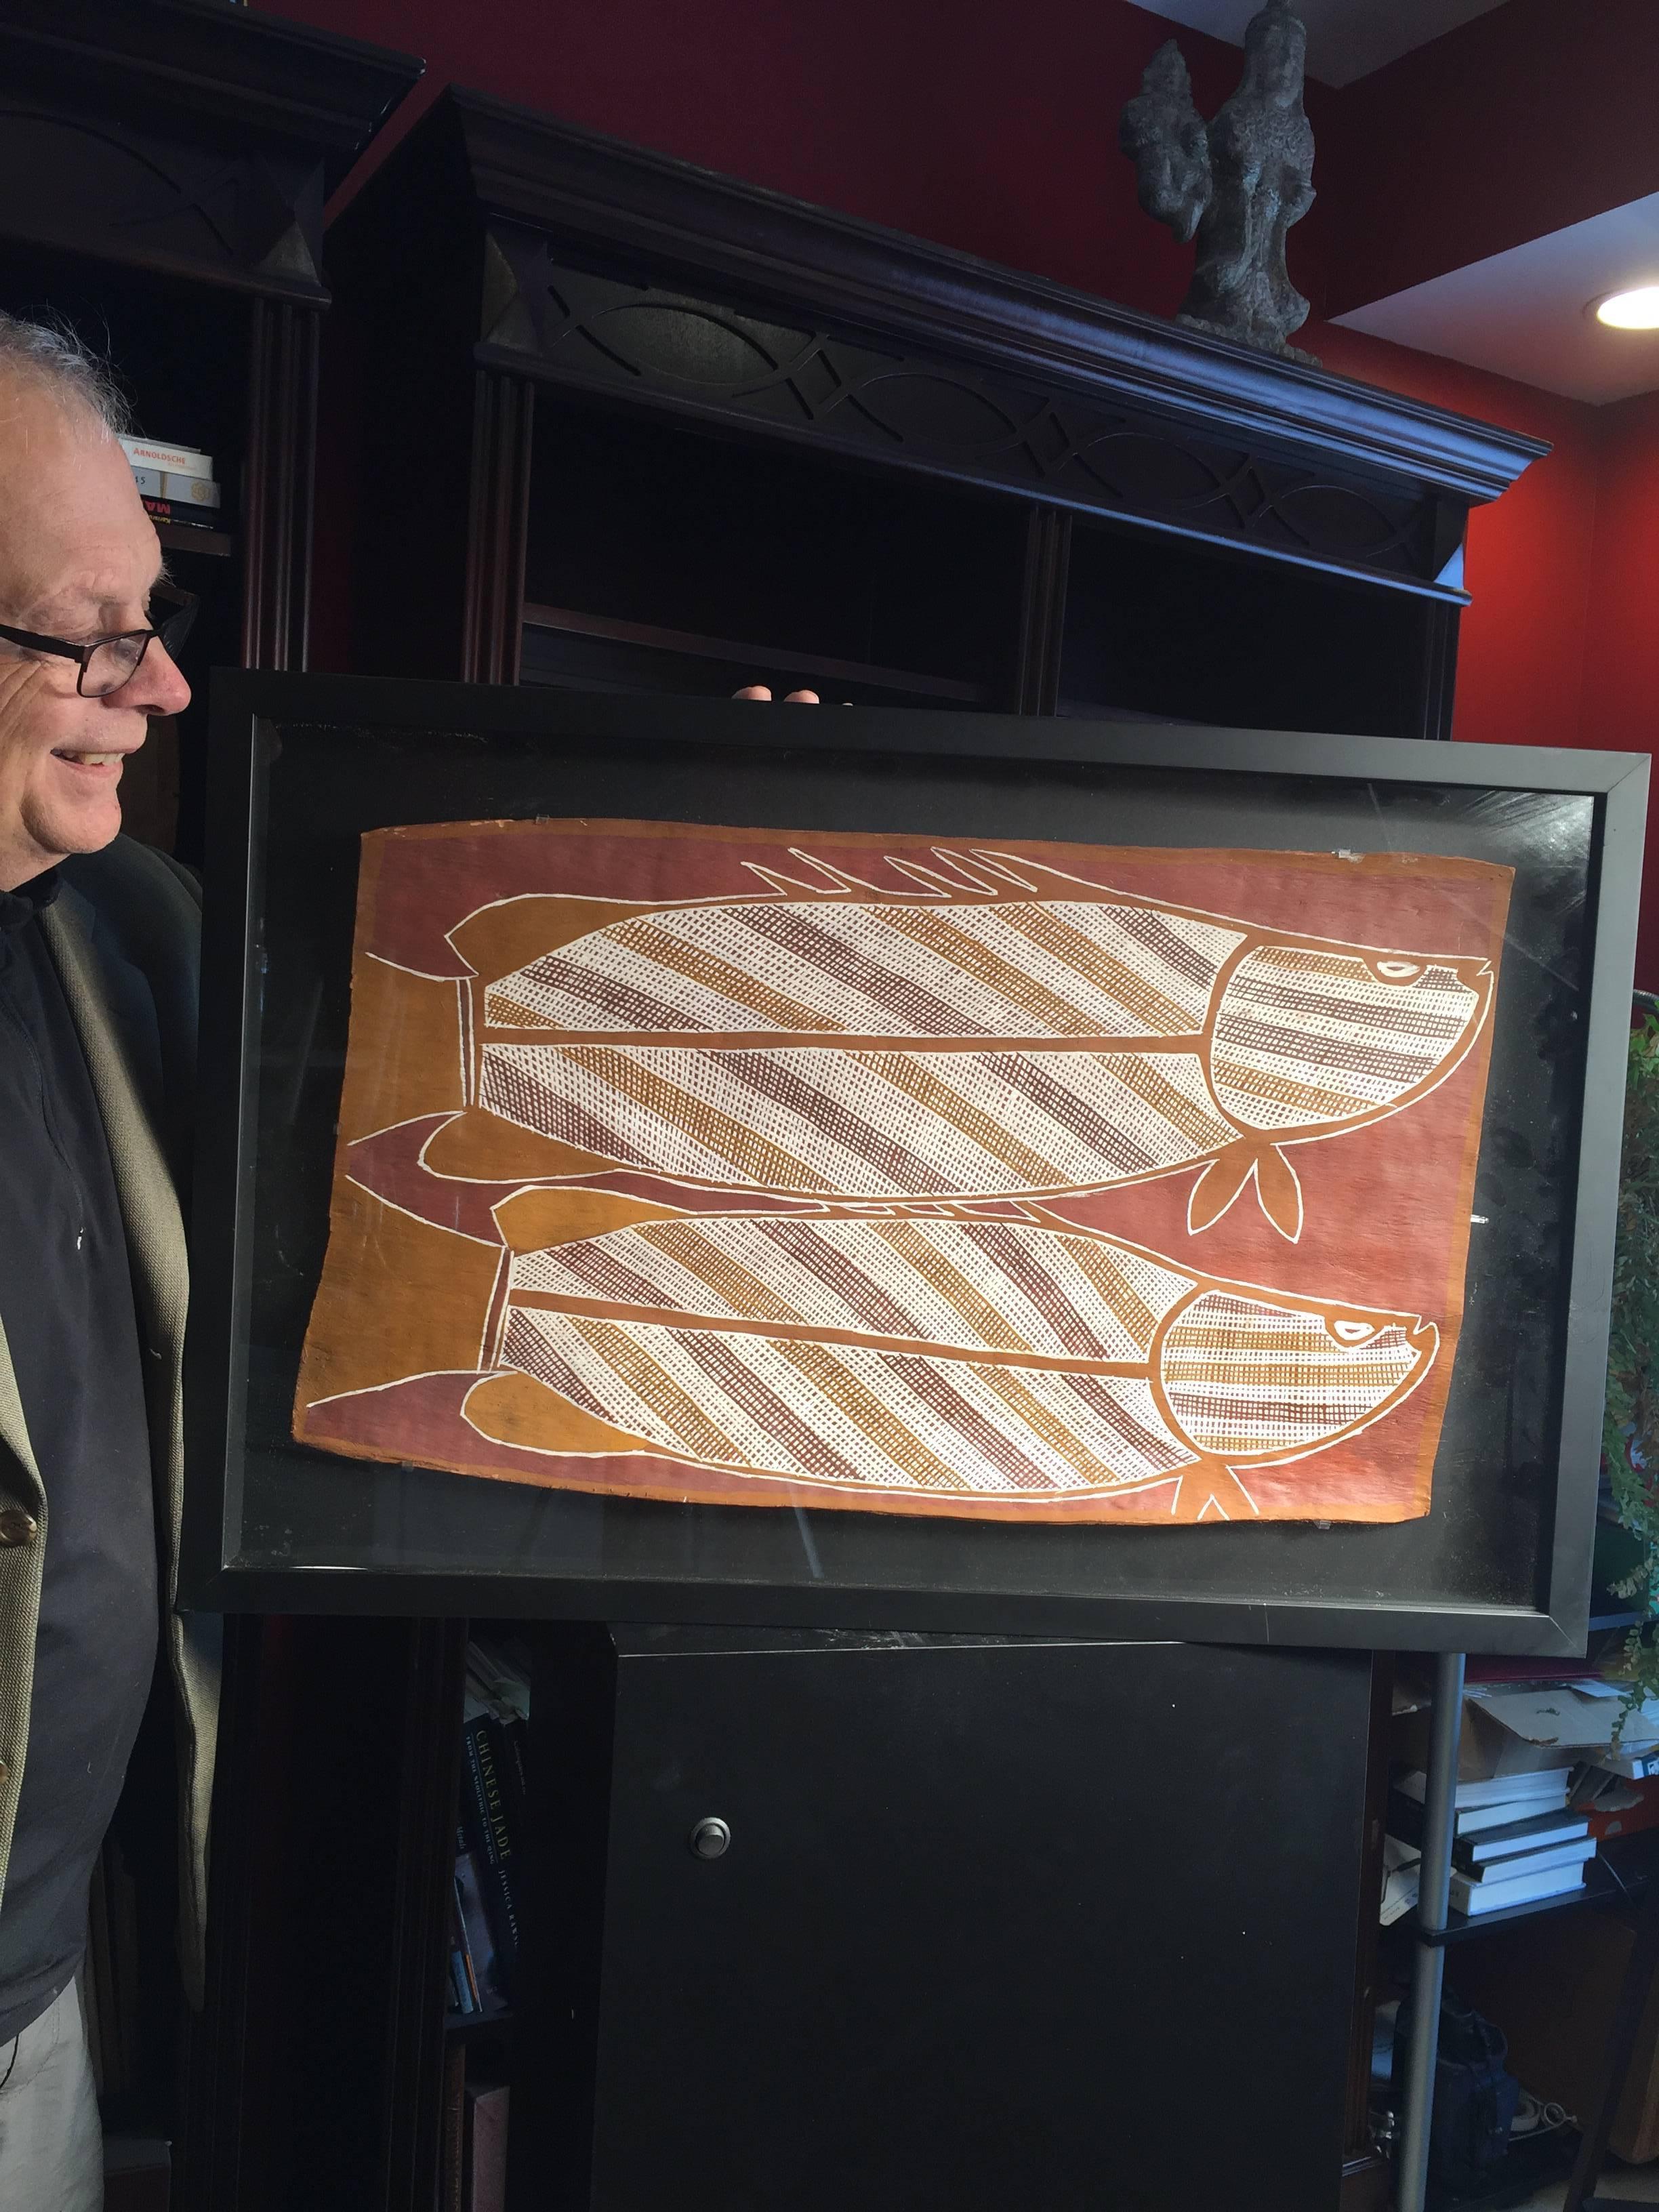 A monumental Australian aboriginal double fish bark painting of Barramundi (sea bass) by artist Campyon, Northern Territories dating some 35 years ago. 

Condition: Mint condition.

Quality:  Superb rendering in classic cross hatch style recently